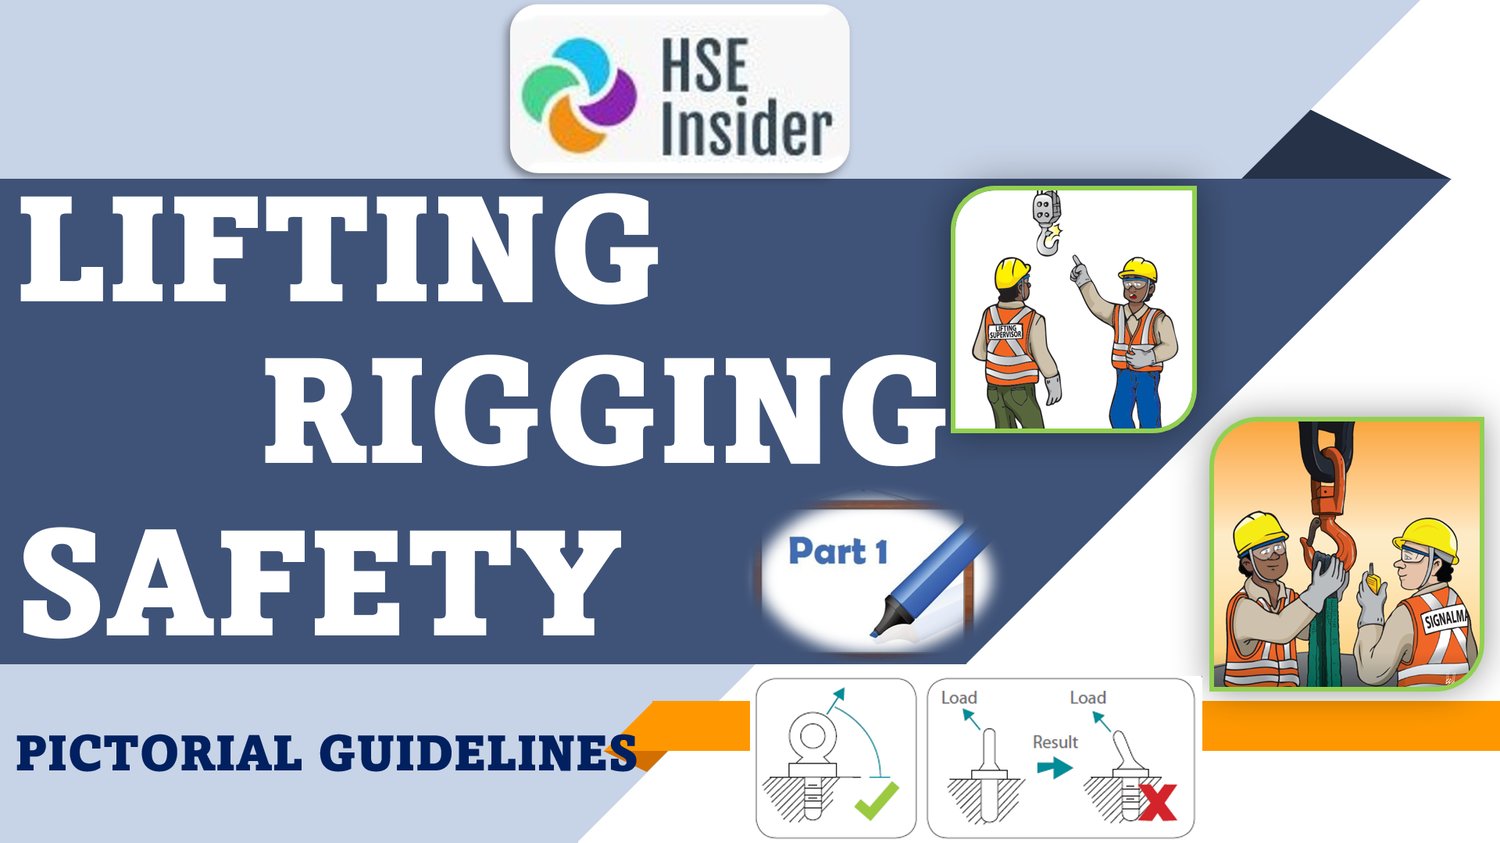 Lifting Rigging Safety 1 - Pictorial Guide - Payhip